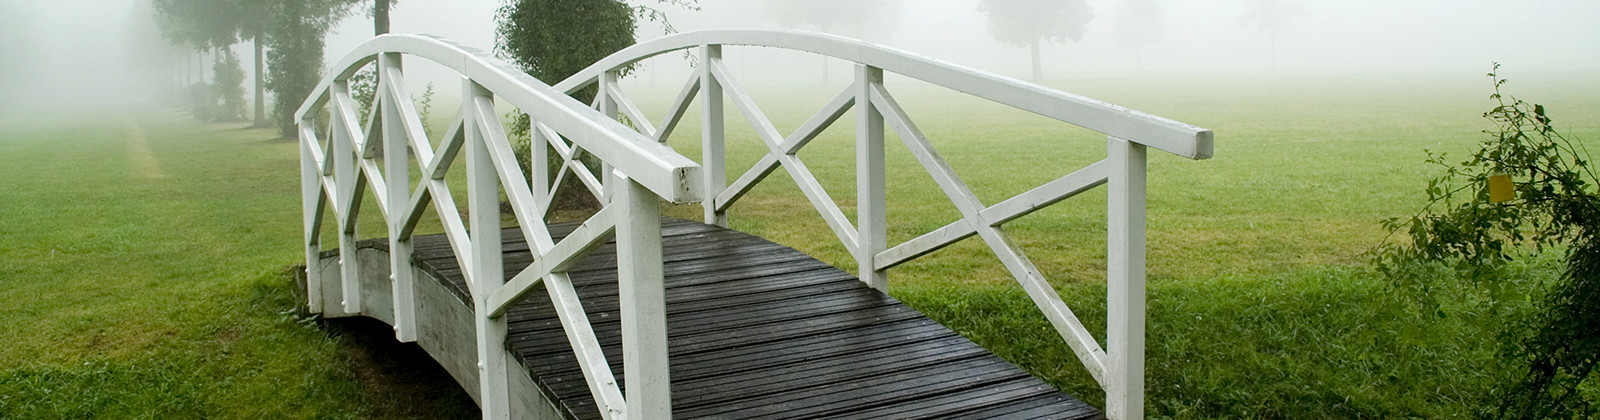 White wooden bridge with green grass in the backgound.